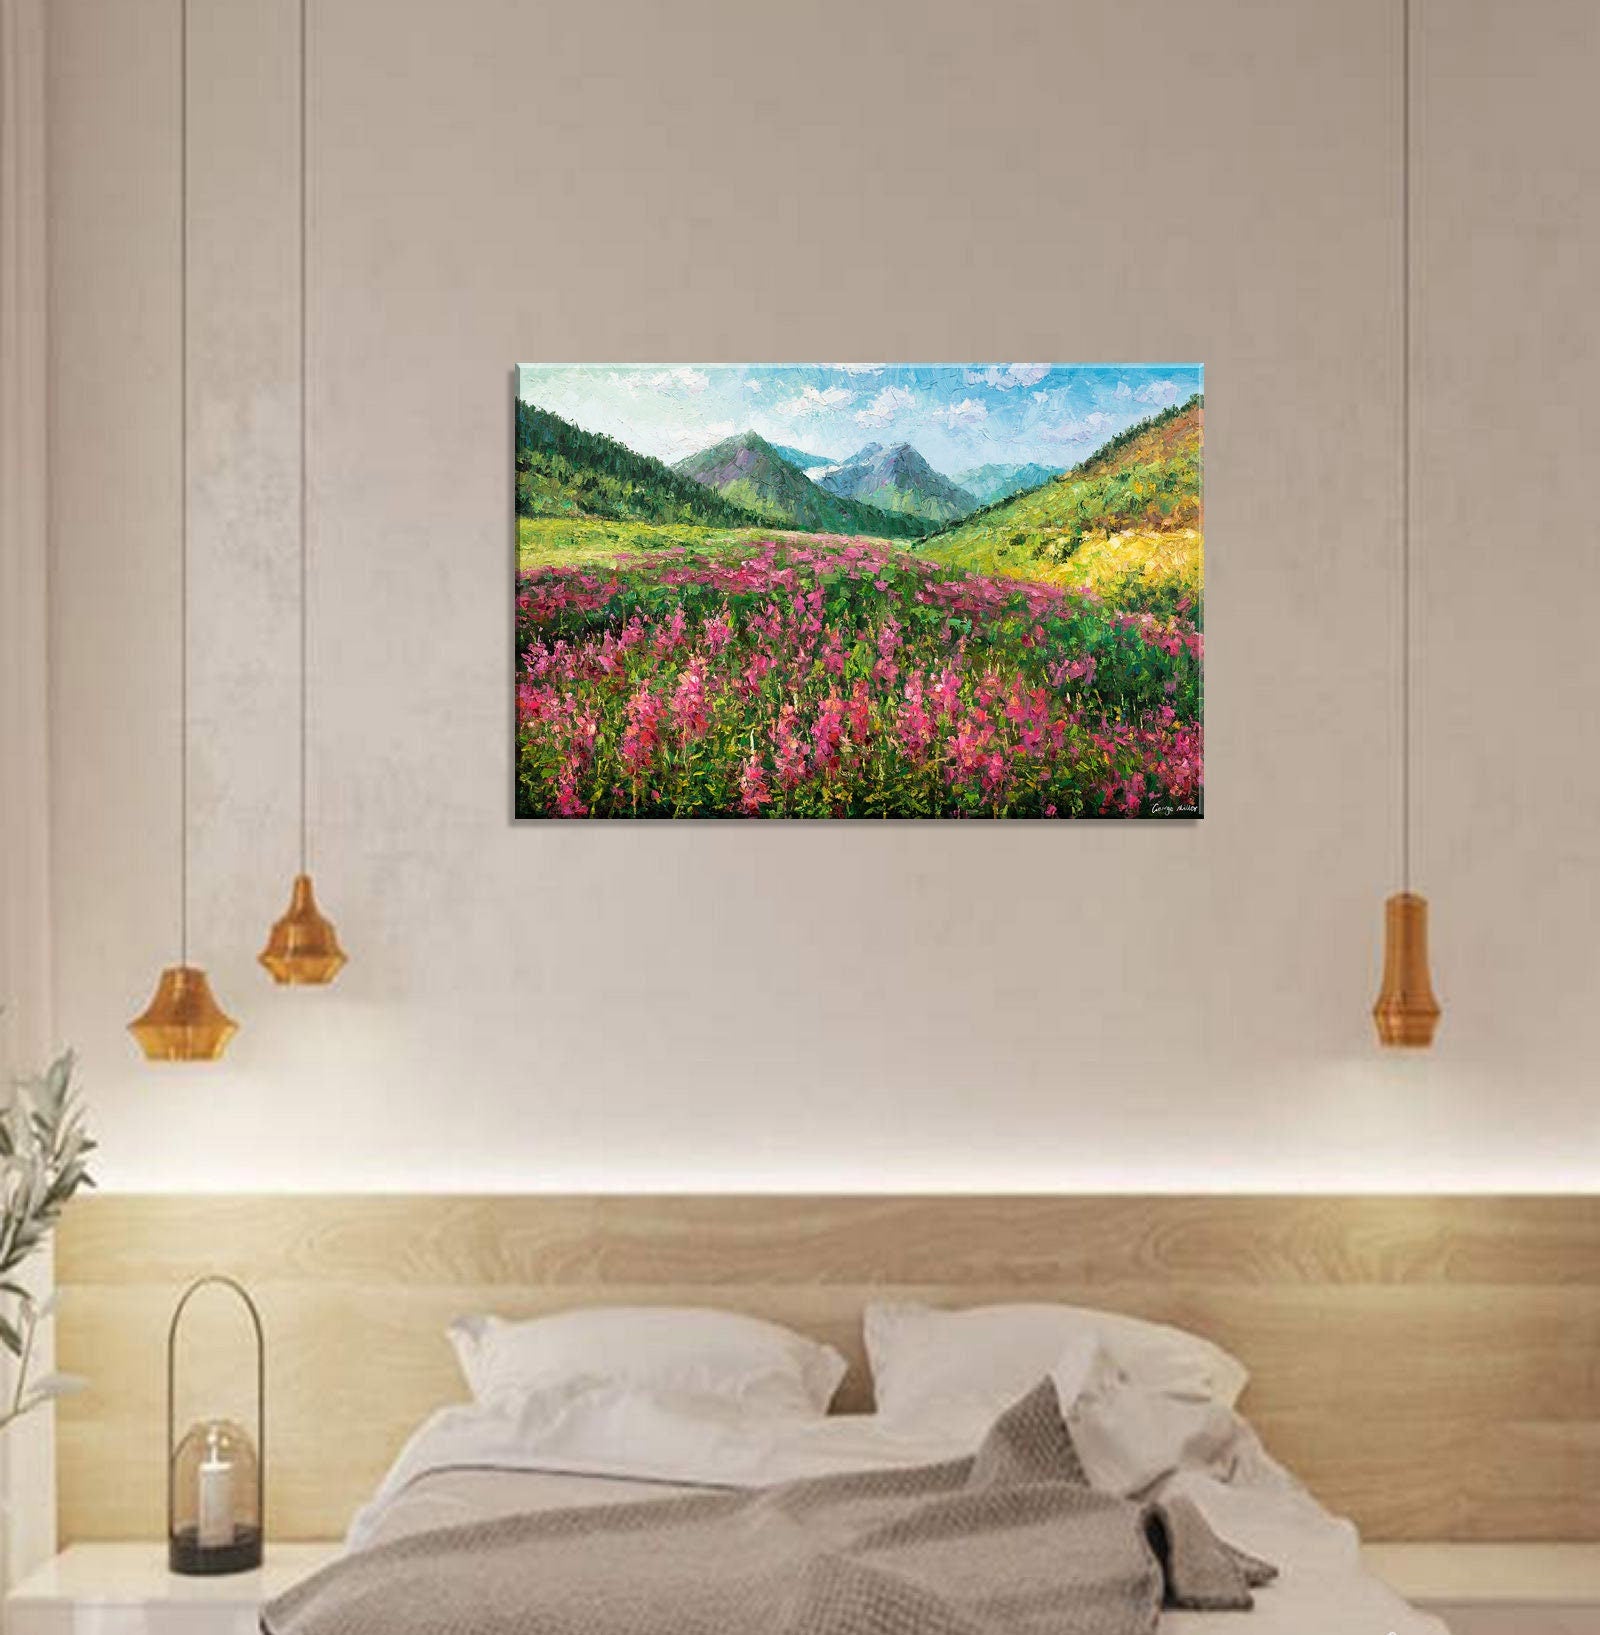 Handmade Contemporary Art: Large Wall Art, 32x48in. Oil on Canvas Painting. Abstract Landscape with Flower Fields and Mountains